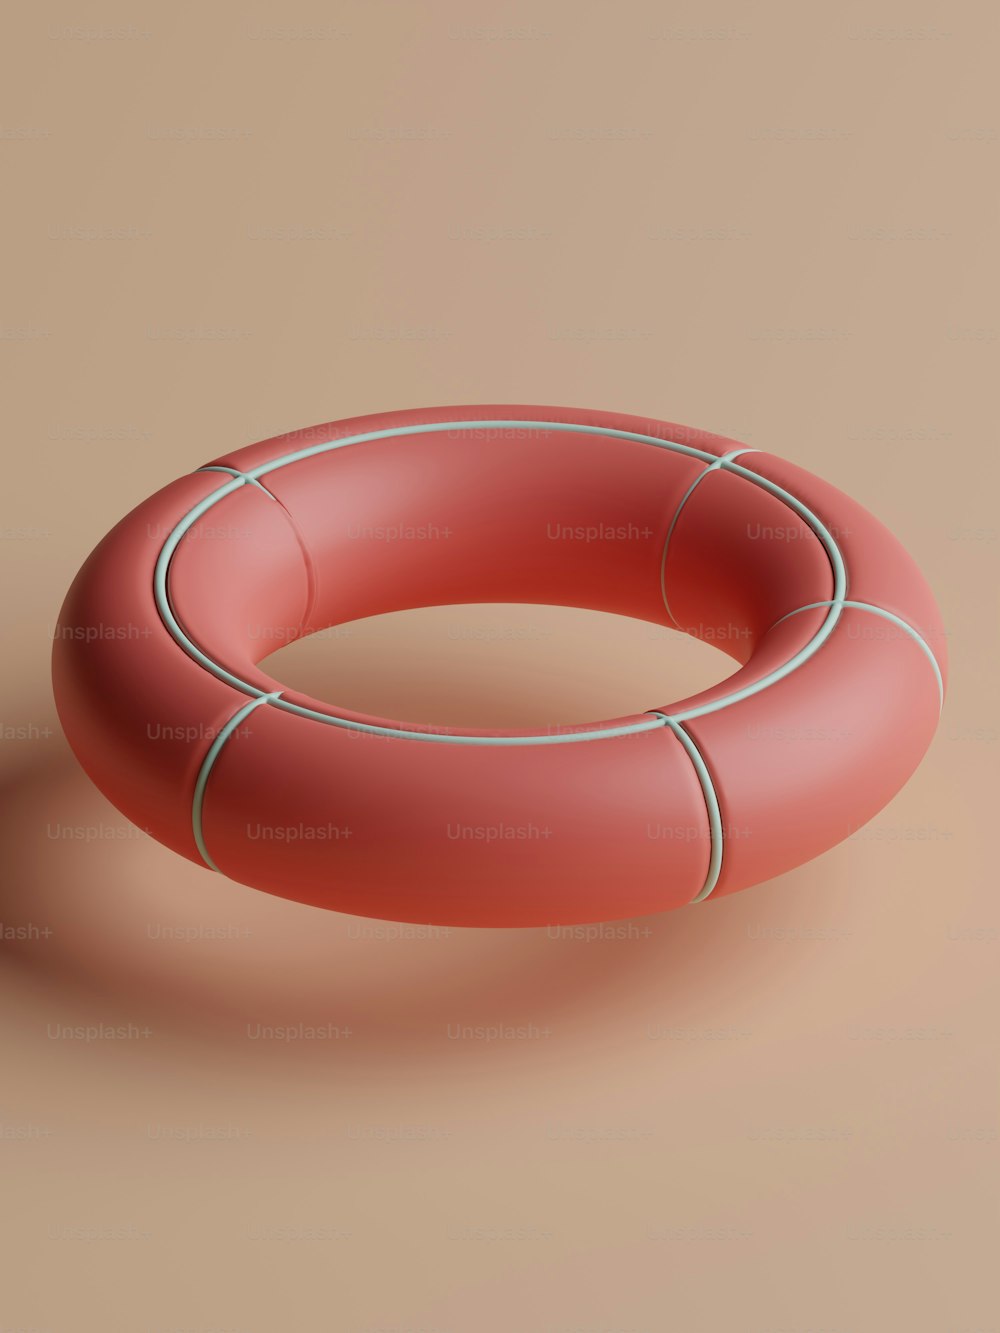 a red life preserver on a tan background